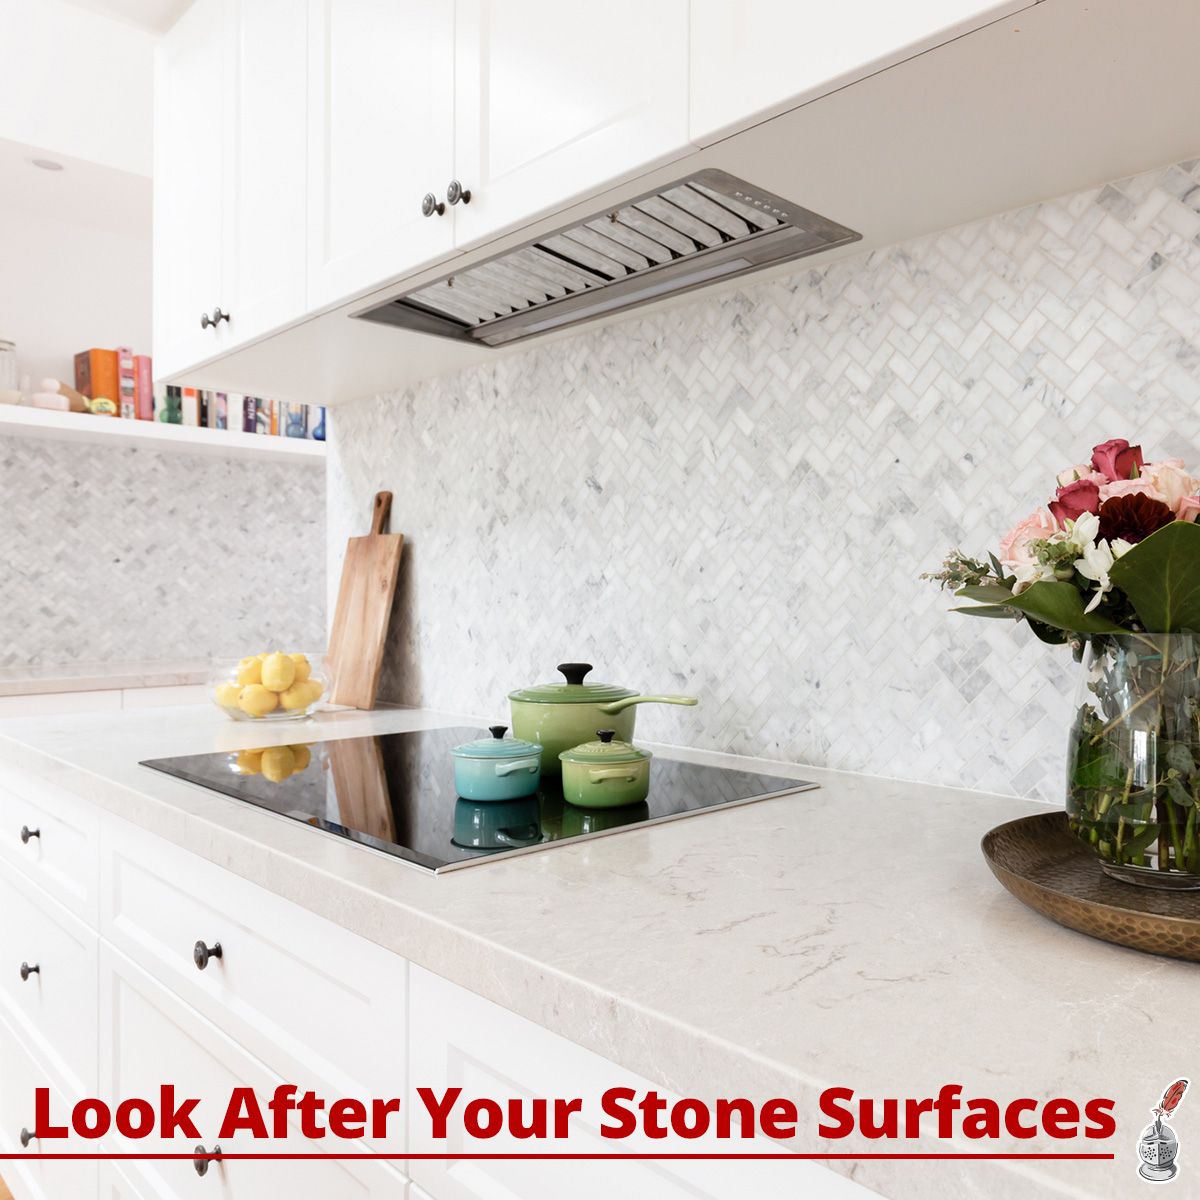 Look After Your Stone Surfaces